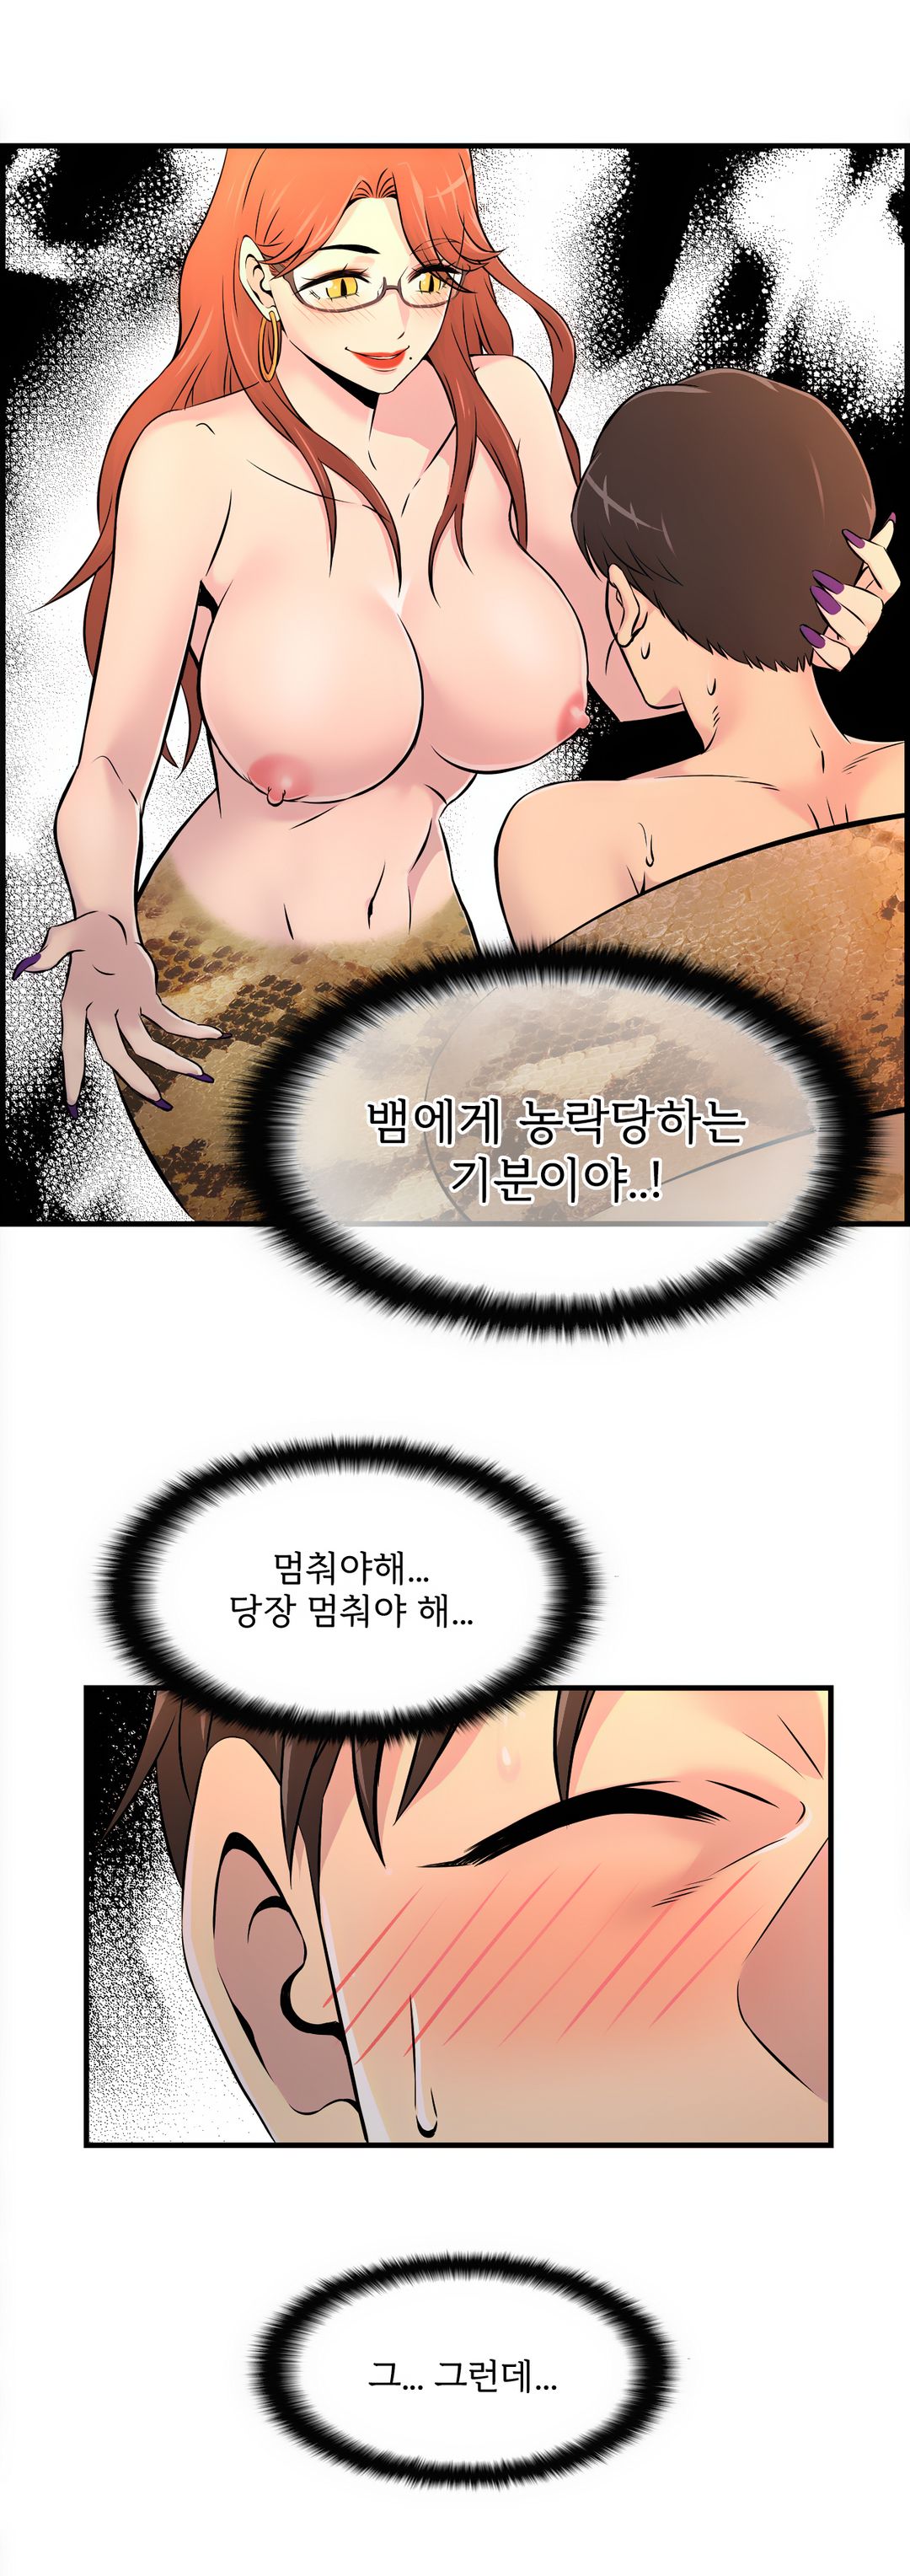 Cram School Scandal Raw - Chapter 9 Page 8